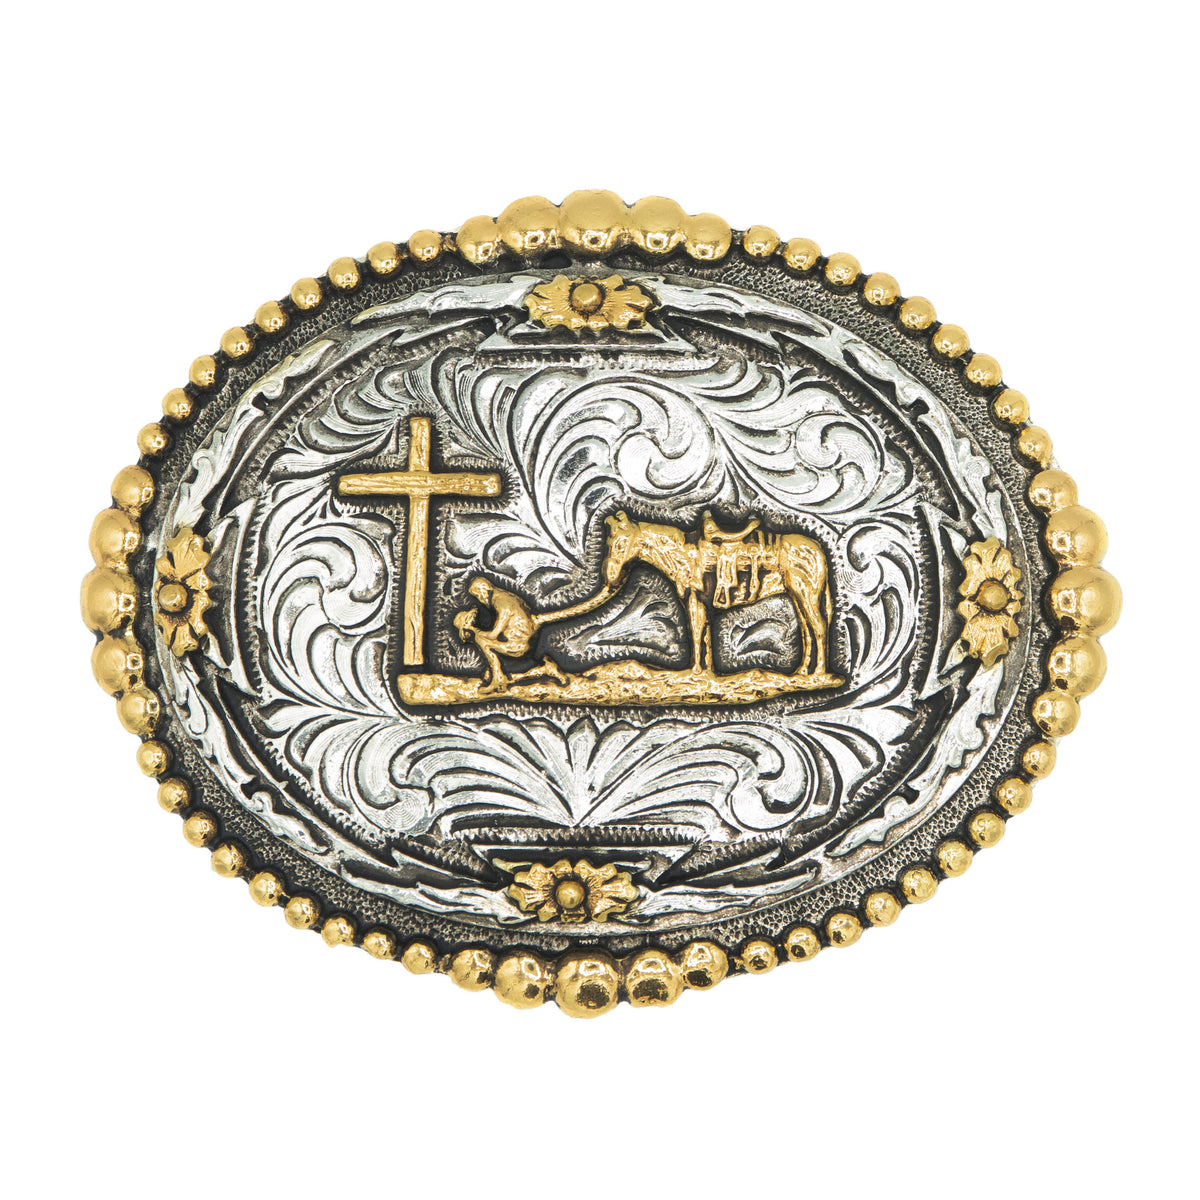 Oval Praying Cowboy with Beaded Edge Buckle